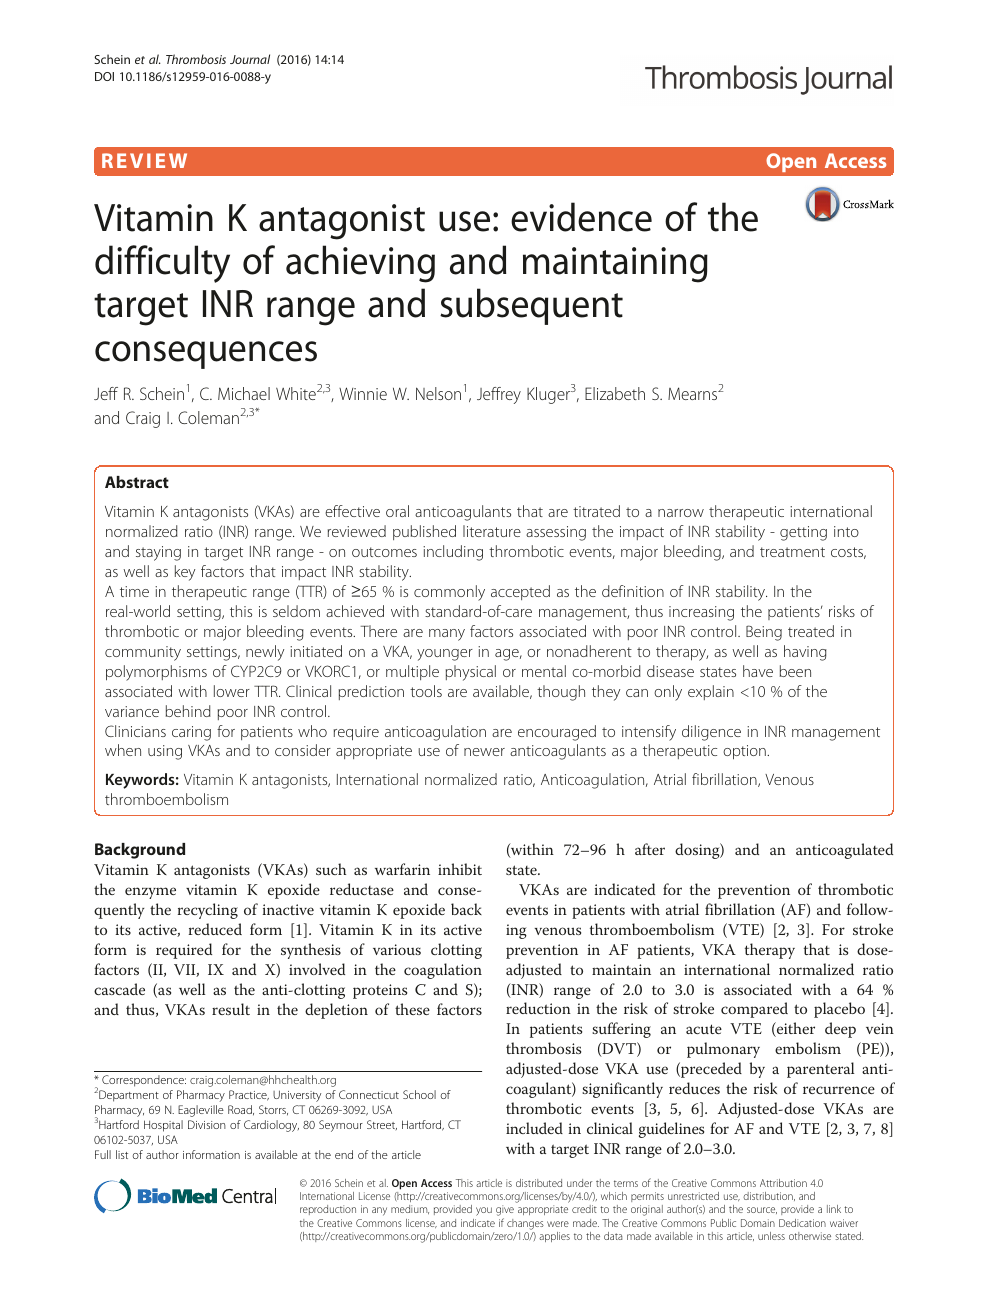 Vitamin K Antagonist Use Evidence Of The Difficulty Of Achieving And Maintaining Target Inr Range And Subsequent Consequences Topic Of Research Paper In Clinical Medicine Download Scholarly Article Pdf And Read